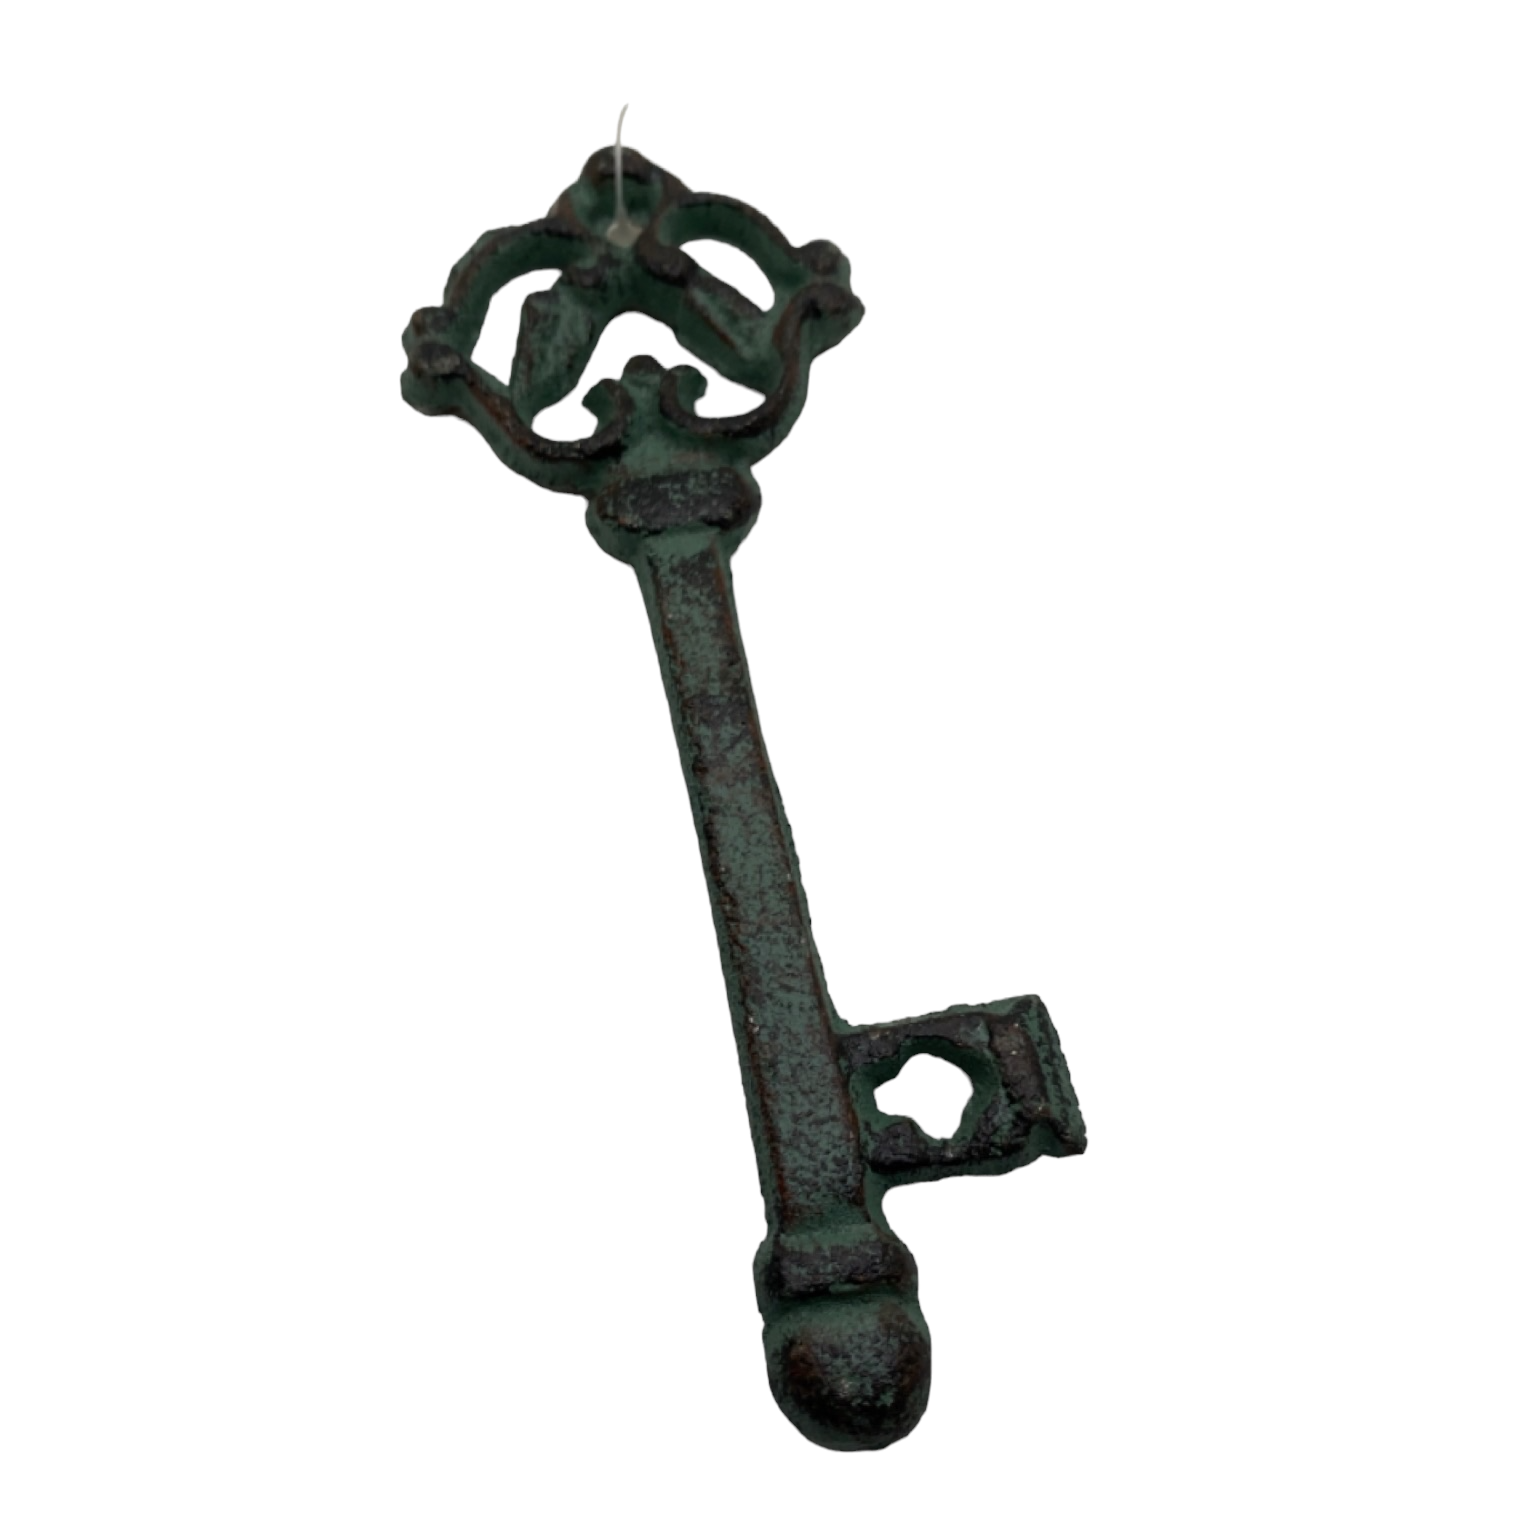 Key Antique Rustic Green Cast Iron - The Renmy Store Homewares & Gifts 